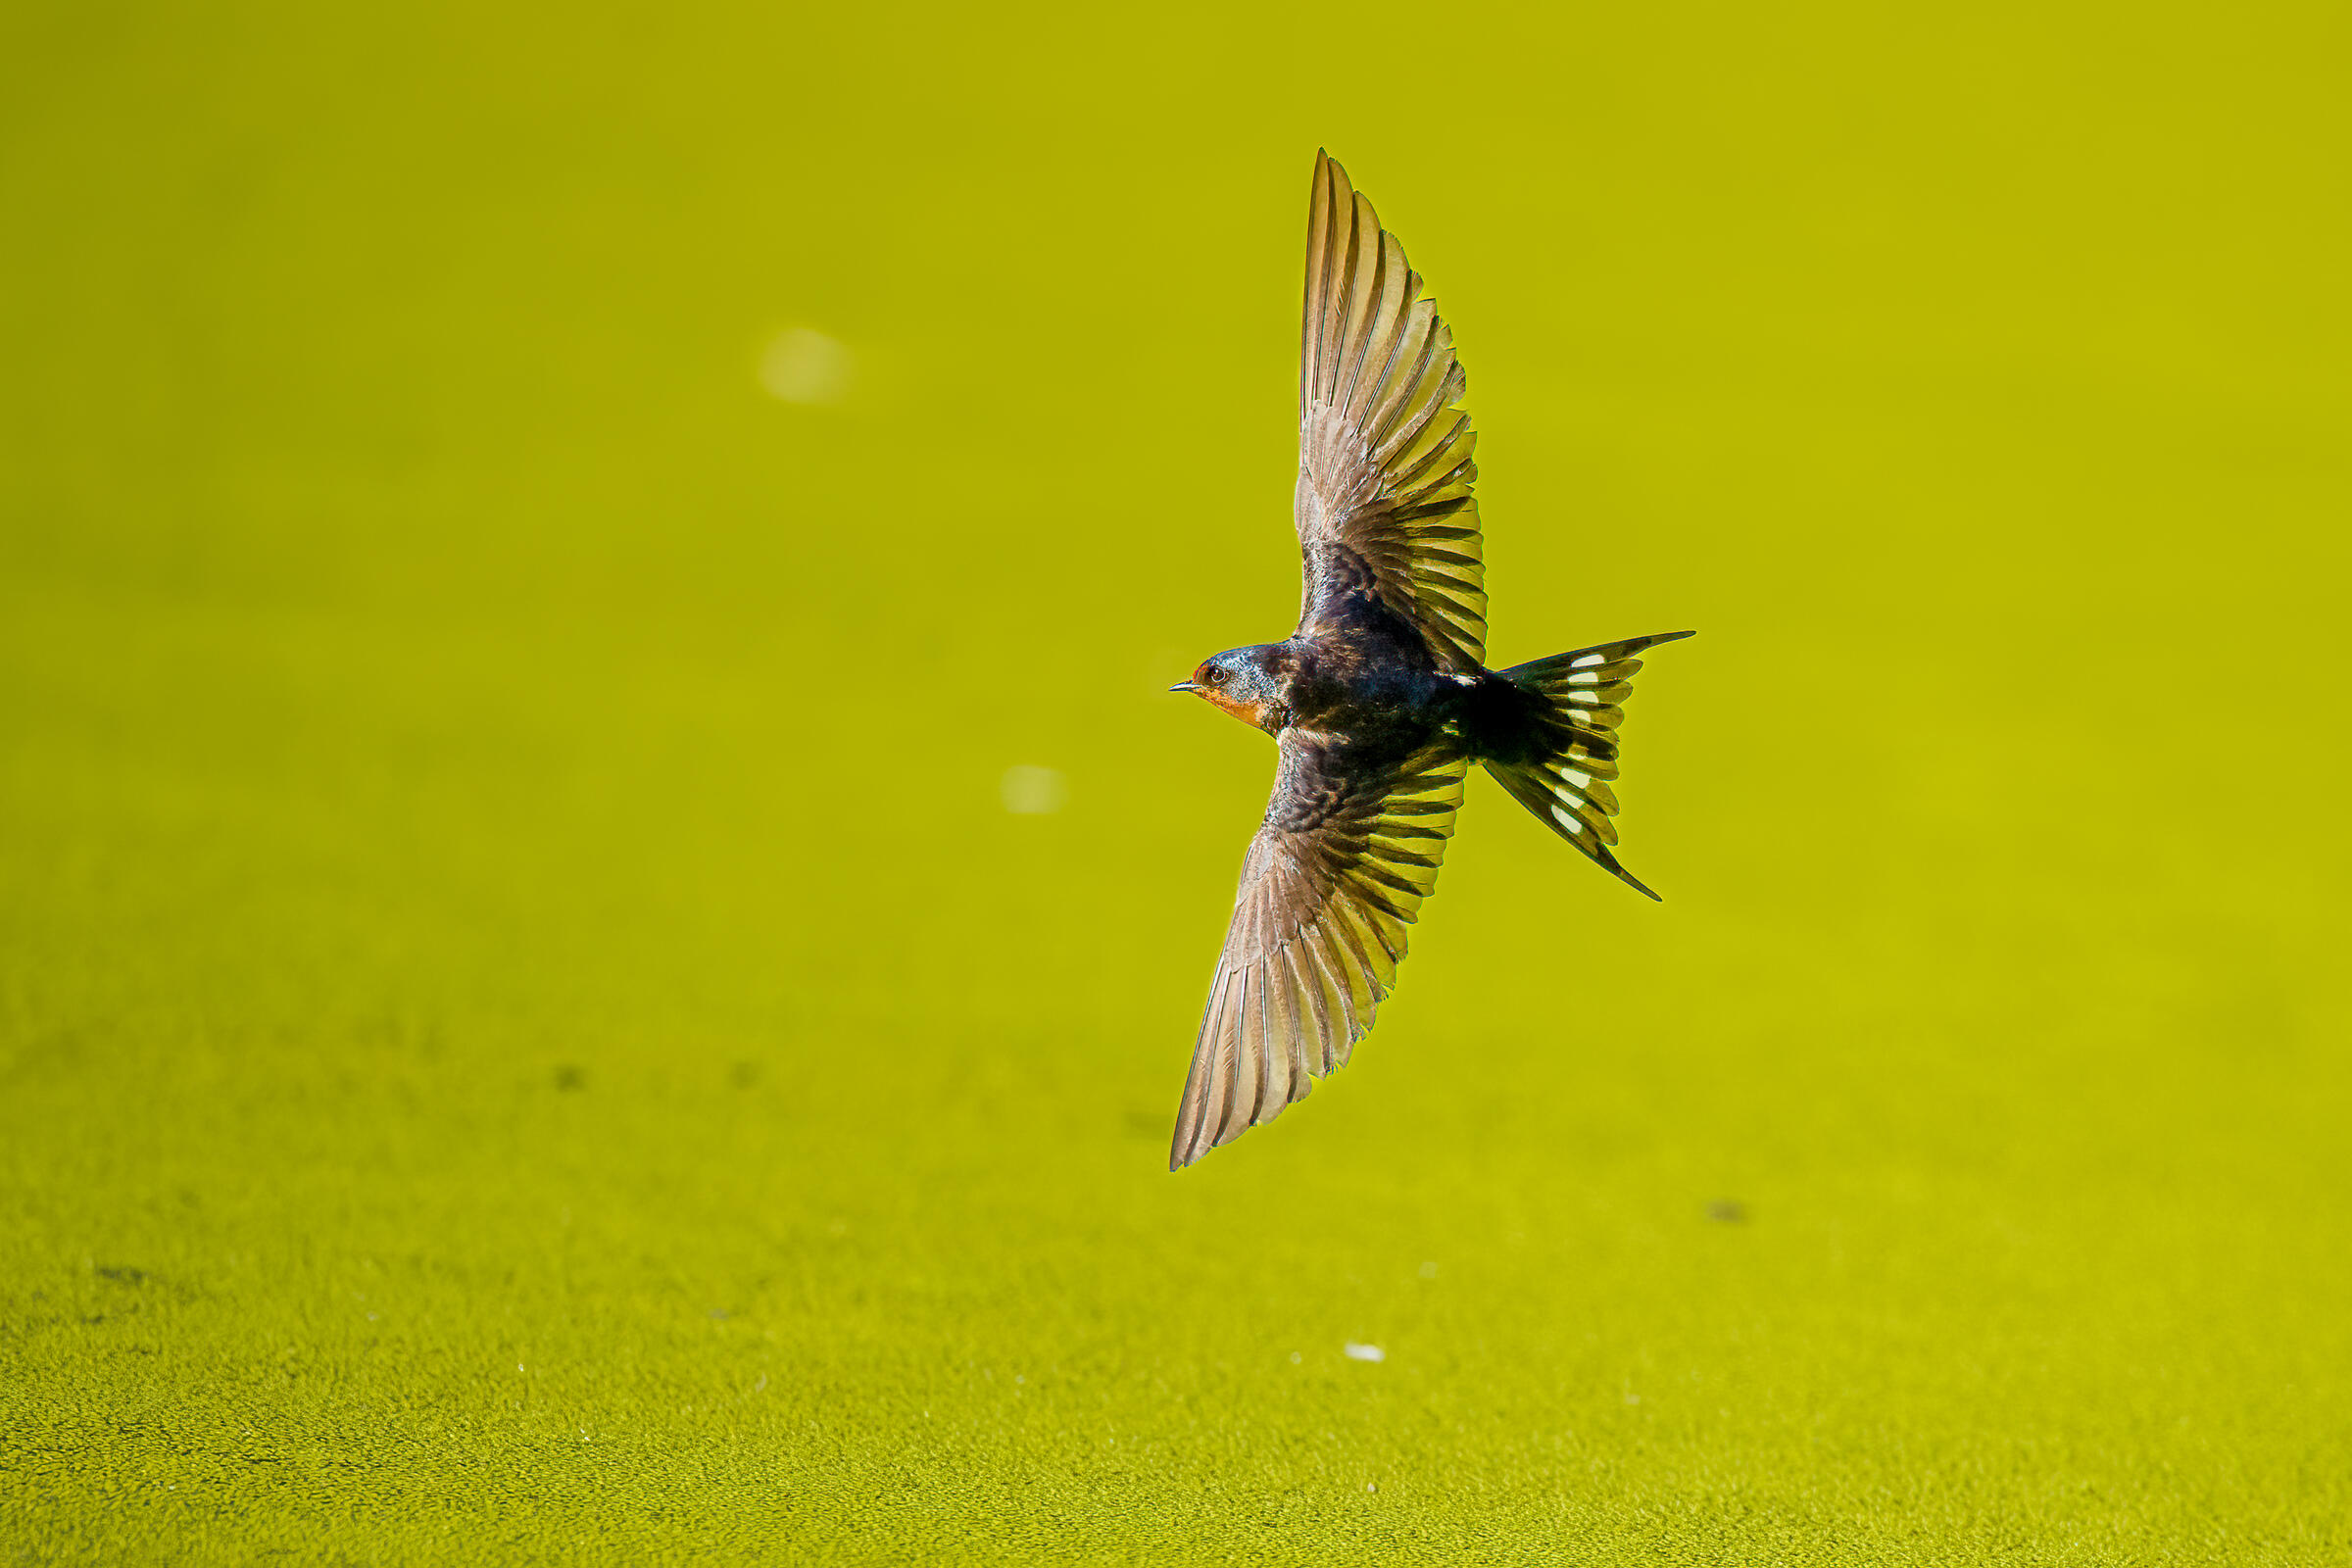 Barn Swallow in flight over a green background.